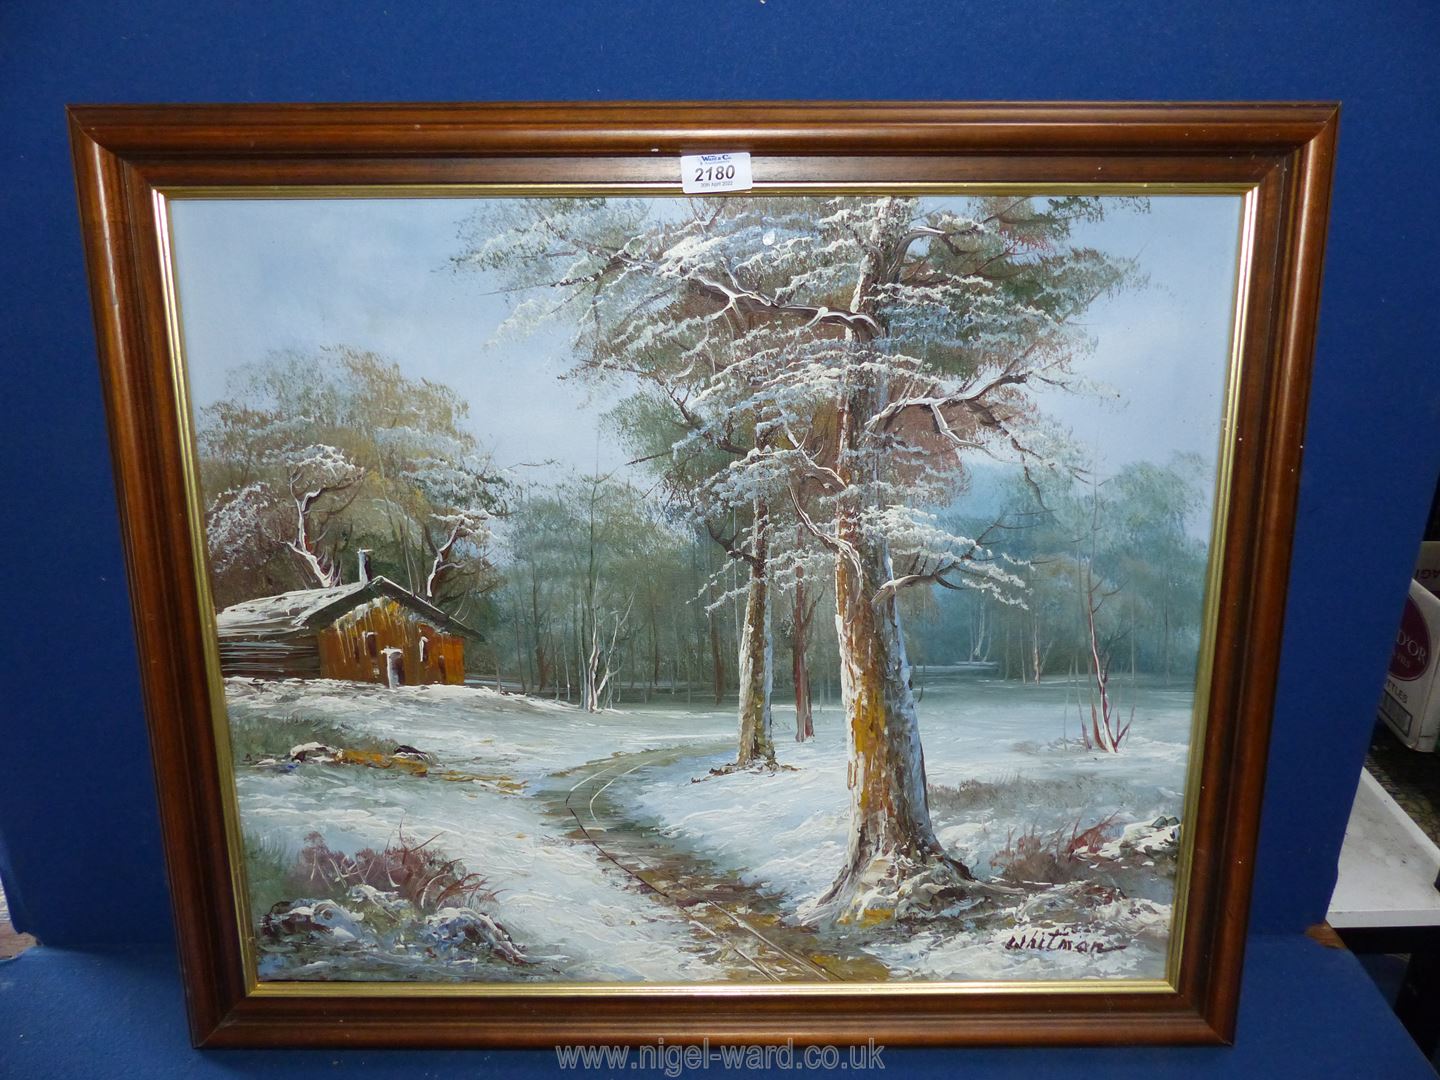 An Oil on canvas of a snowy woodland scene by Whitman